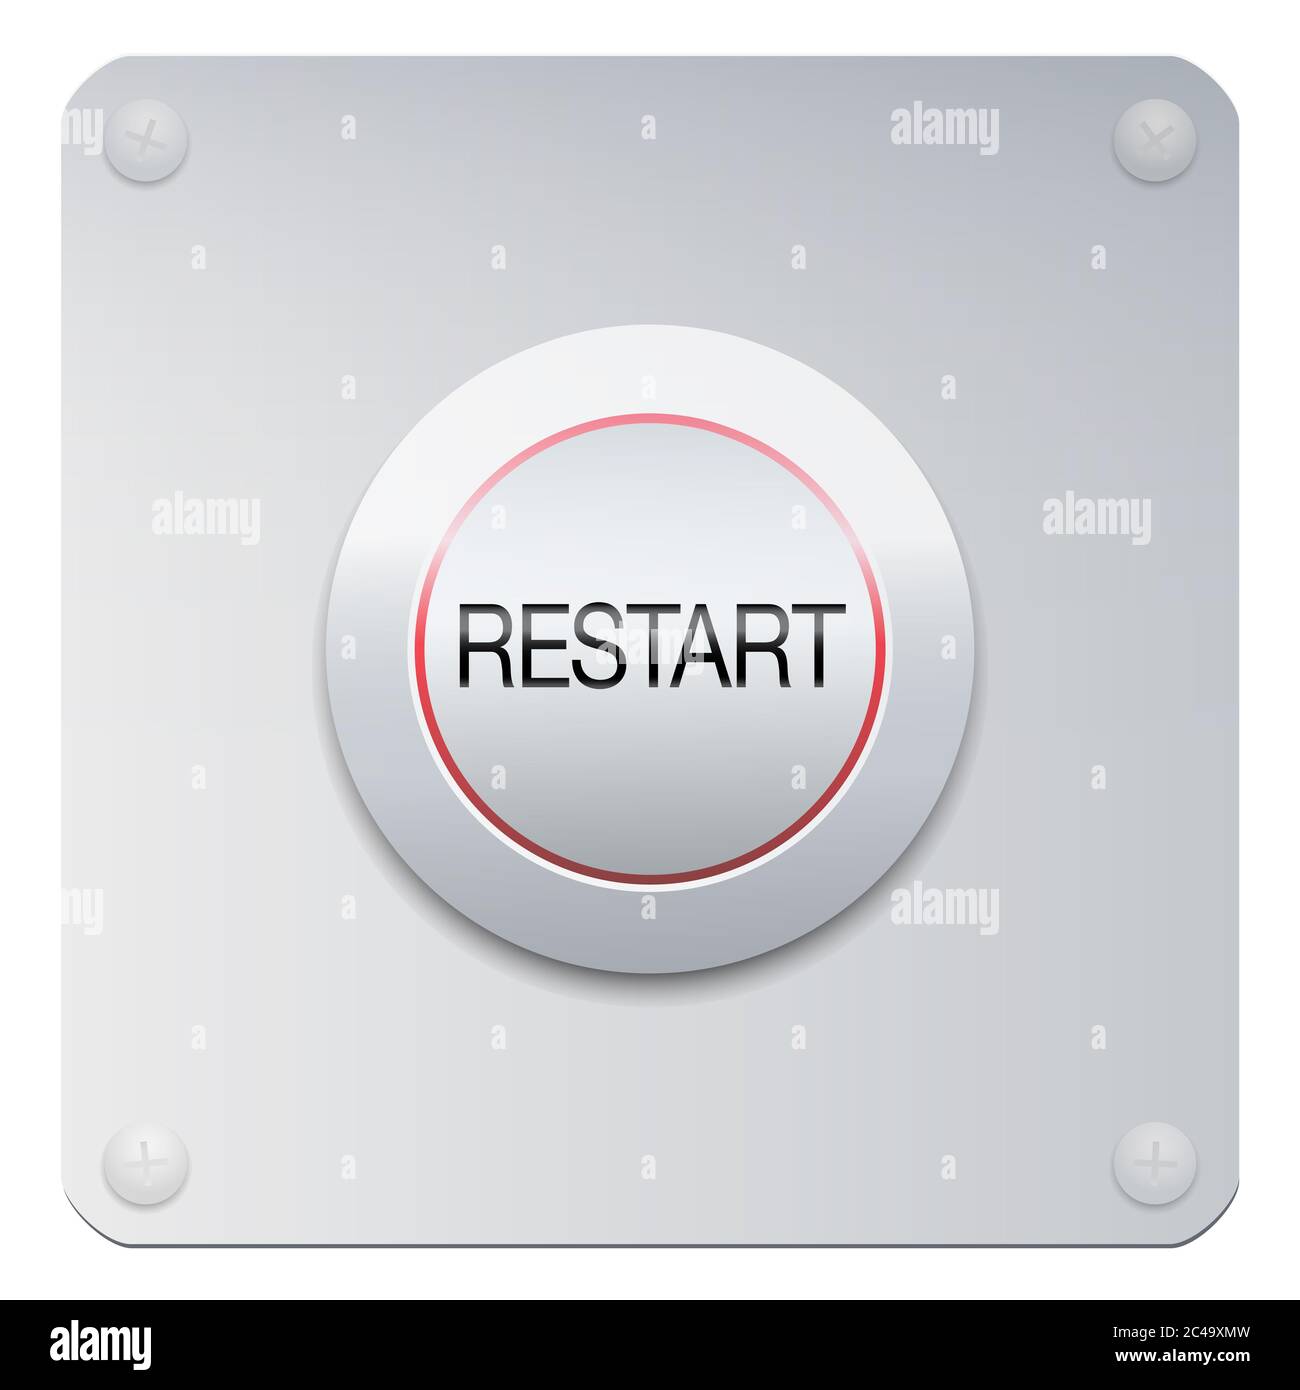 Restart button on a chrome panel to start machines, gadgets instruments, a company, society, but also a new project, adventure, lifestyle. Stock Photo